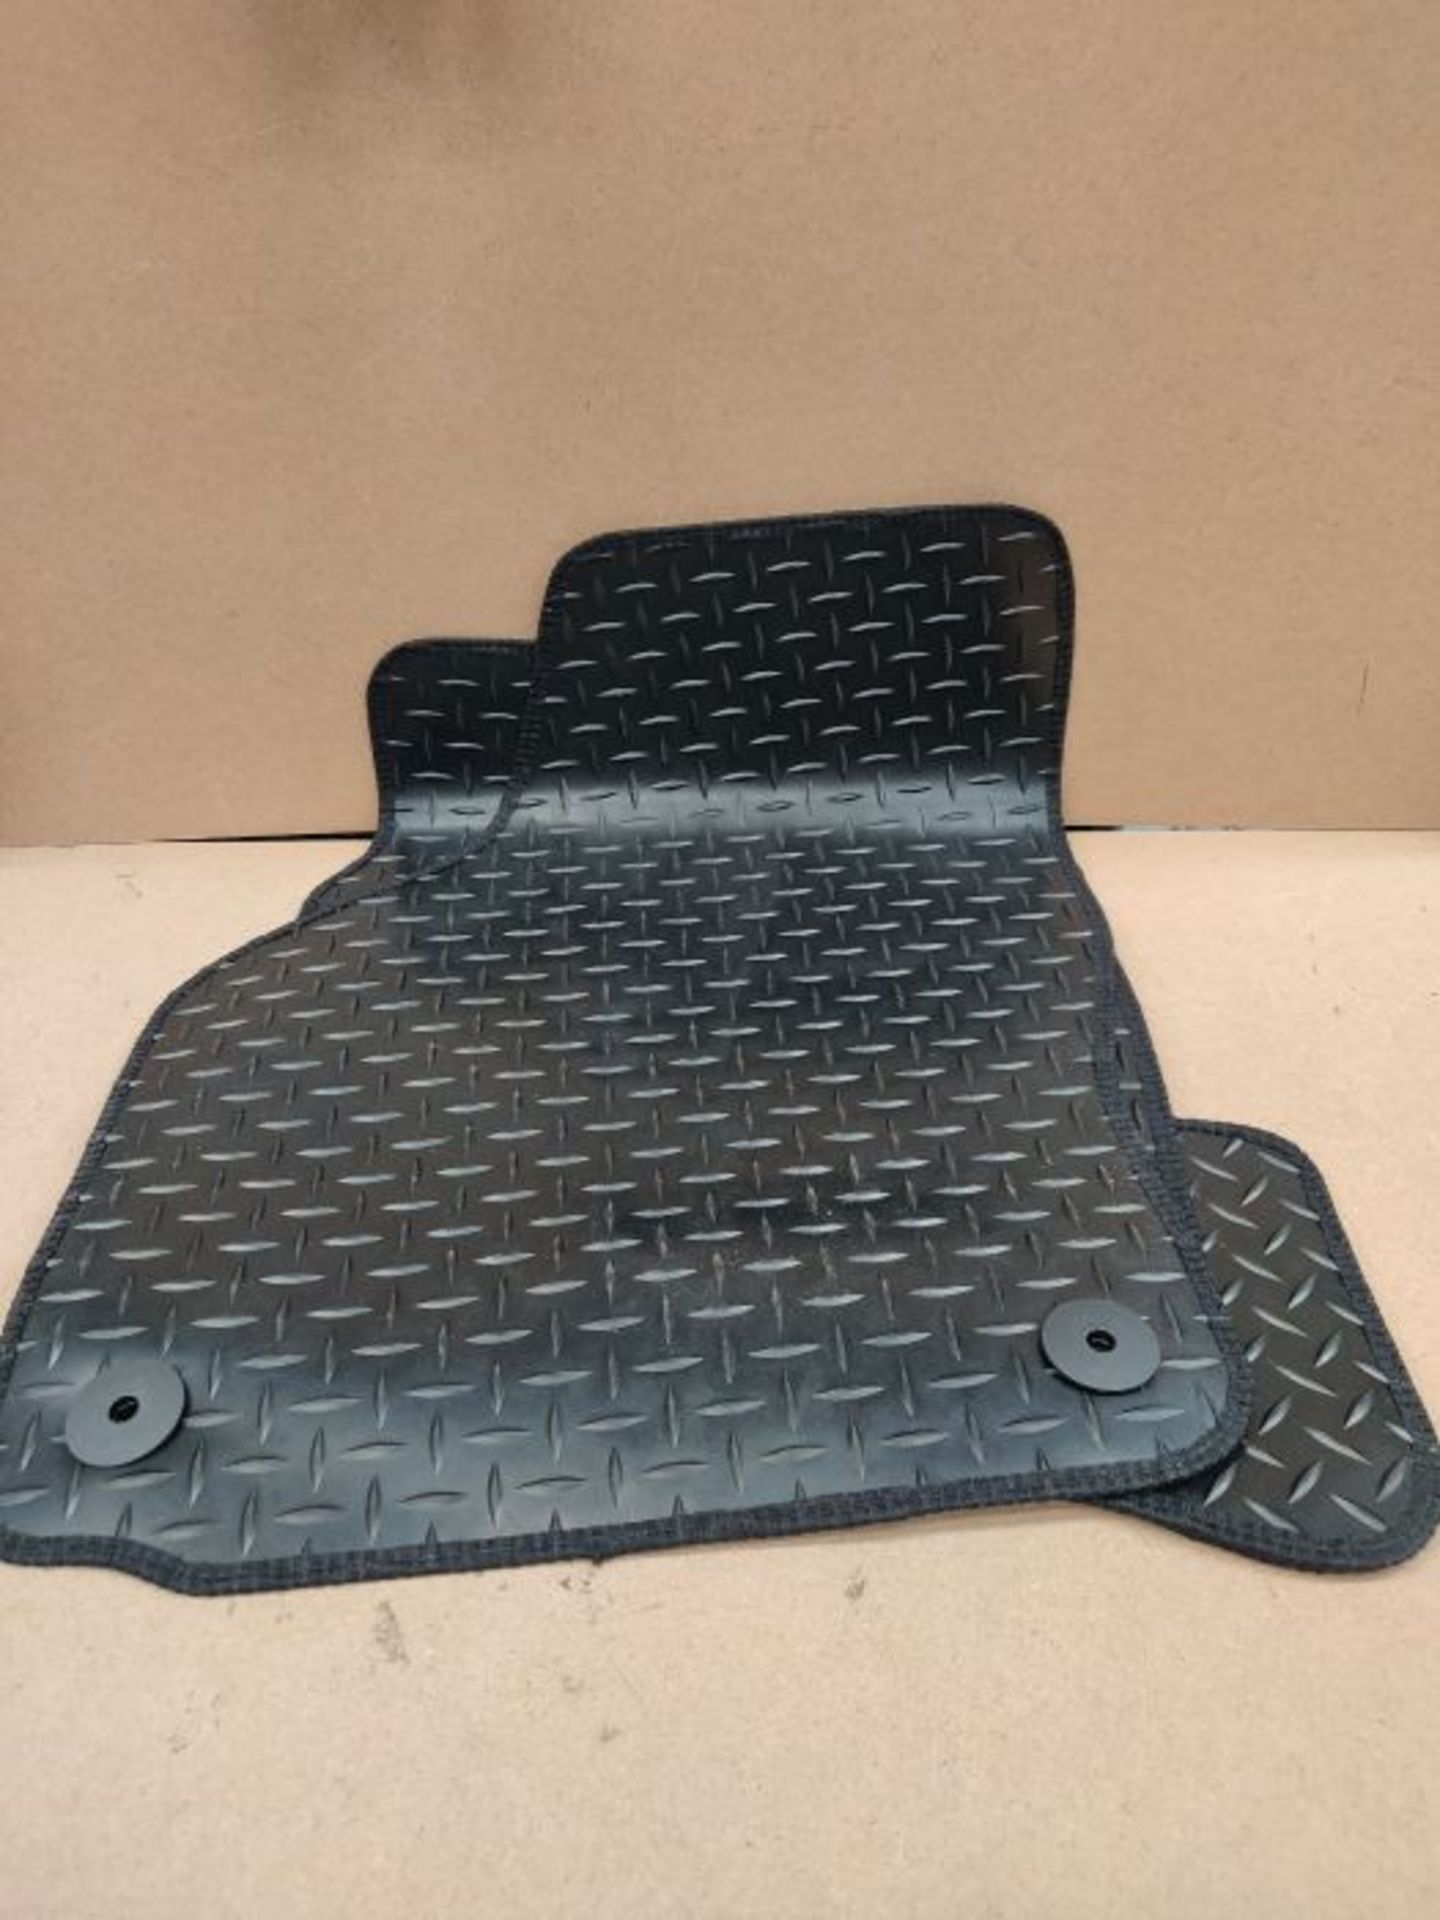 Carsio Tailored 4 Piece Rubber Car Mat Set 4 Round Clips TO FIT - Volkswagen Golf MK6 - Image 2 of 2